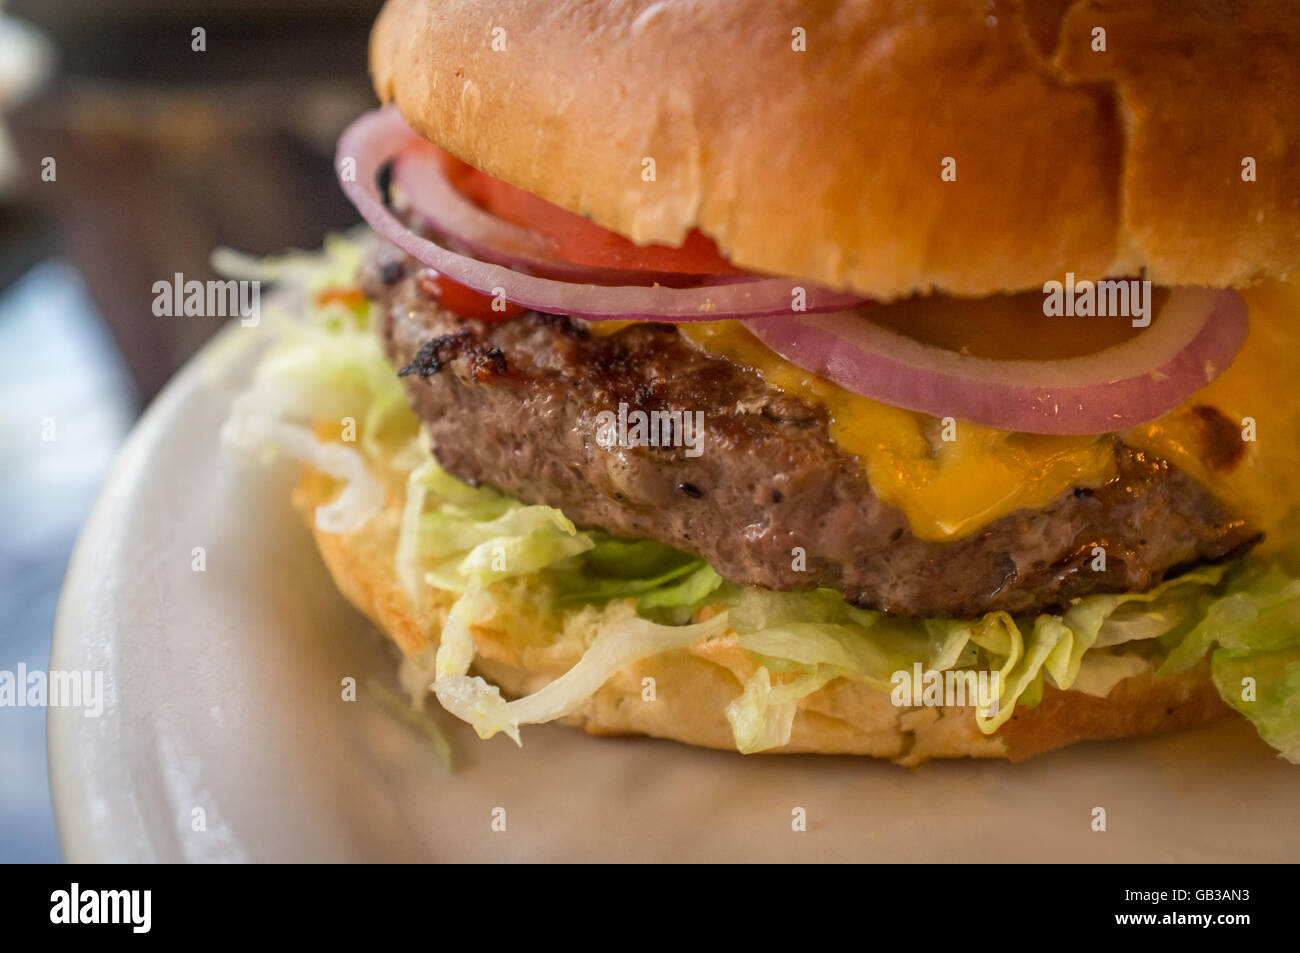 Cheeseburger on a whole wheat bun with steak fries on the side Stock Photo